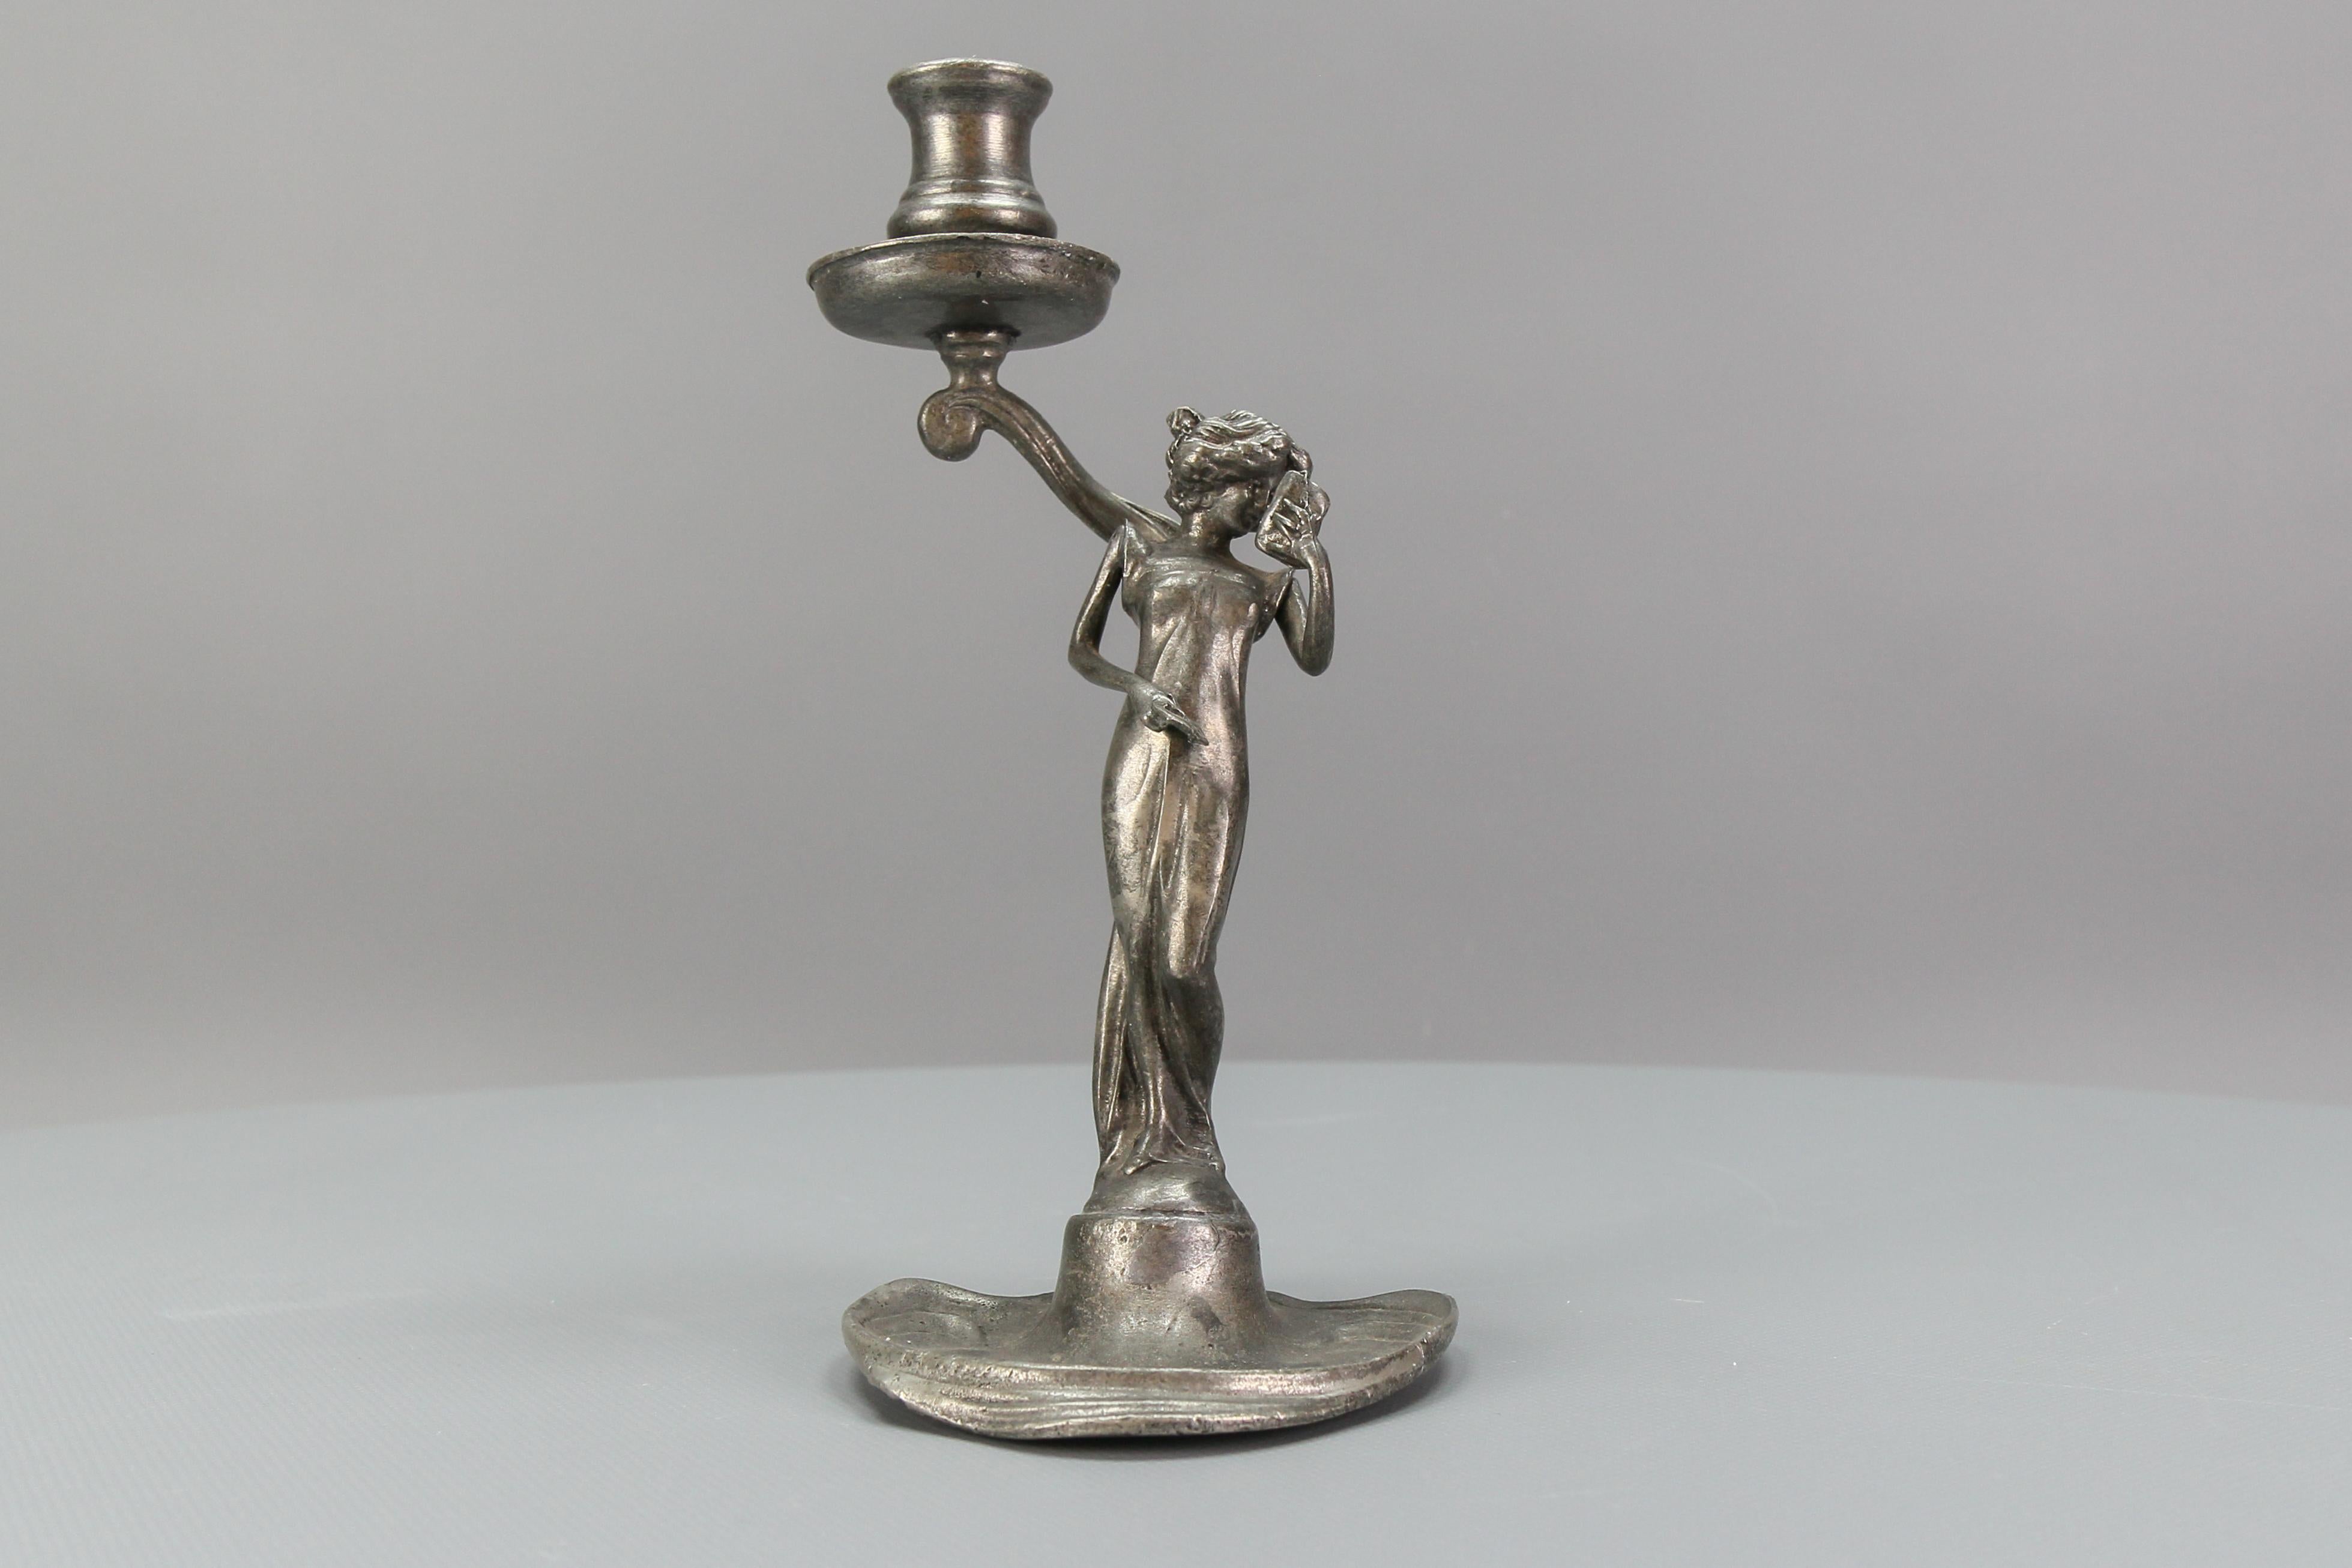 French Art Nouveau Pewter Candlestick with a Lady Sculpture, ca. 1920 For Sale 2